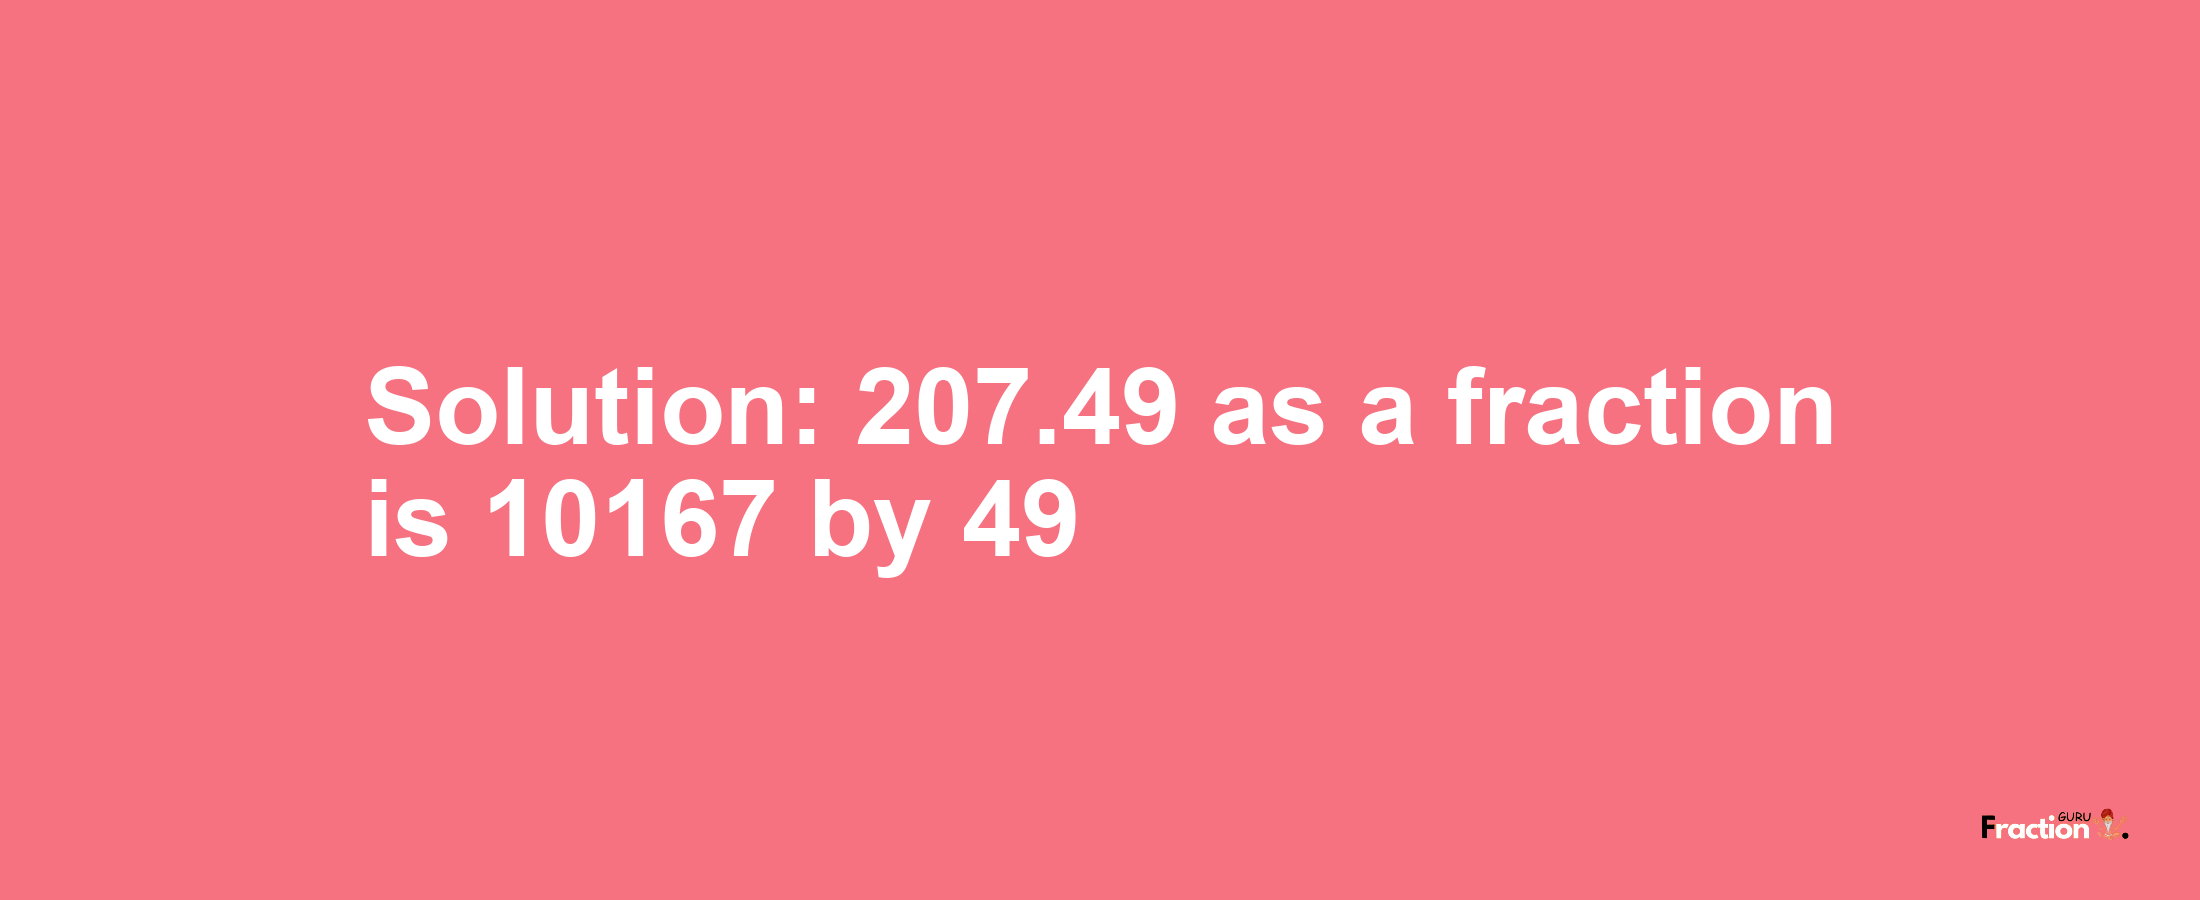 Solution:207.49 as a fraction is 10167/49